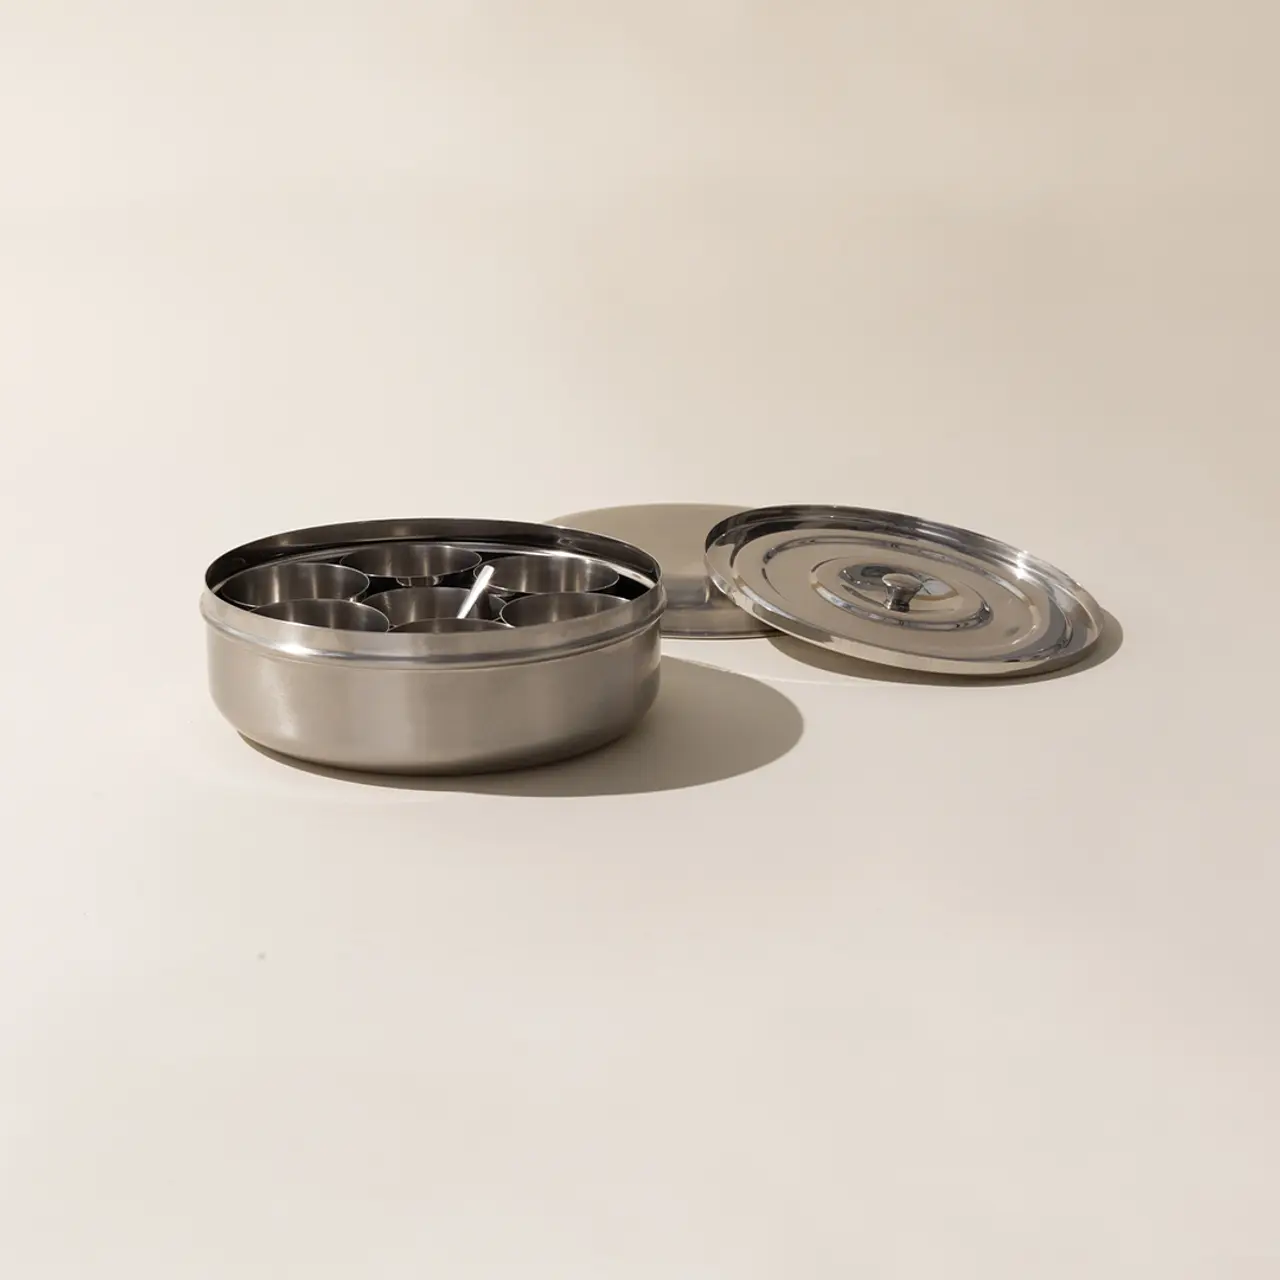 A stainless steel ashtray with multiple cigarette rests is shown beside its detached lid on a pale surface.